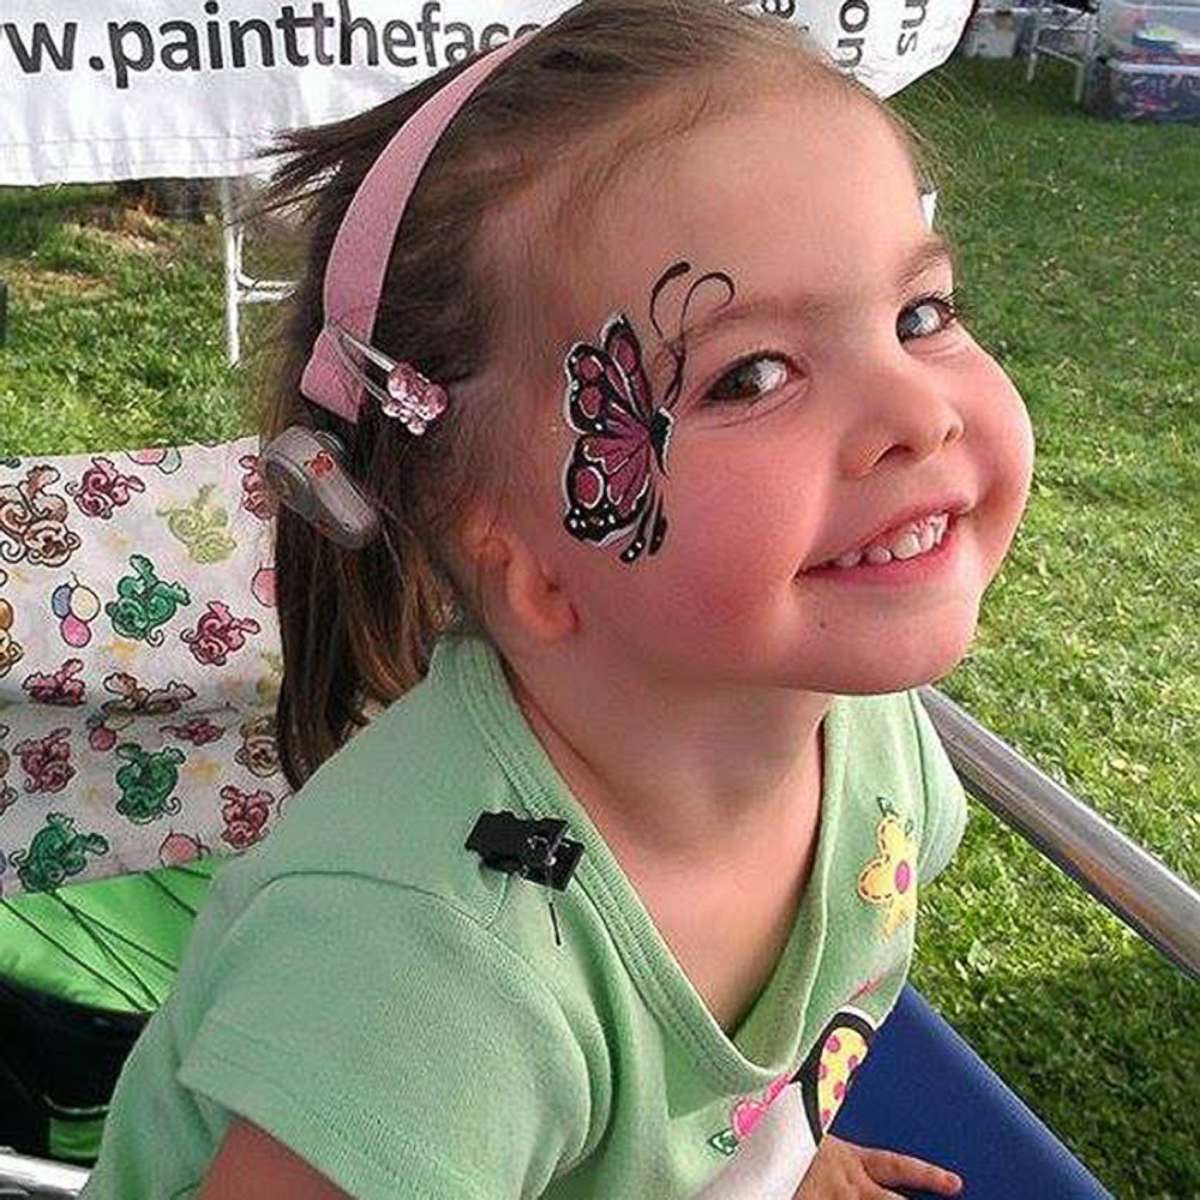 PHOTO: Ally Tumblin, now 9, was born with the absence of her right ear and ear canal.